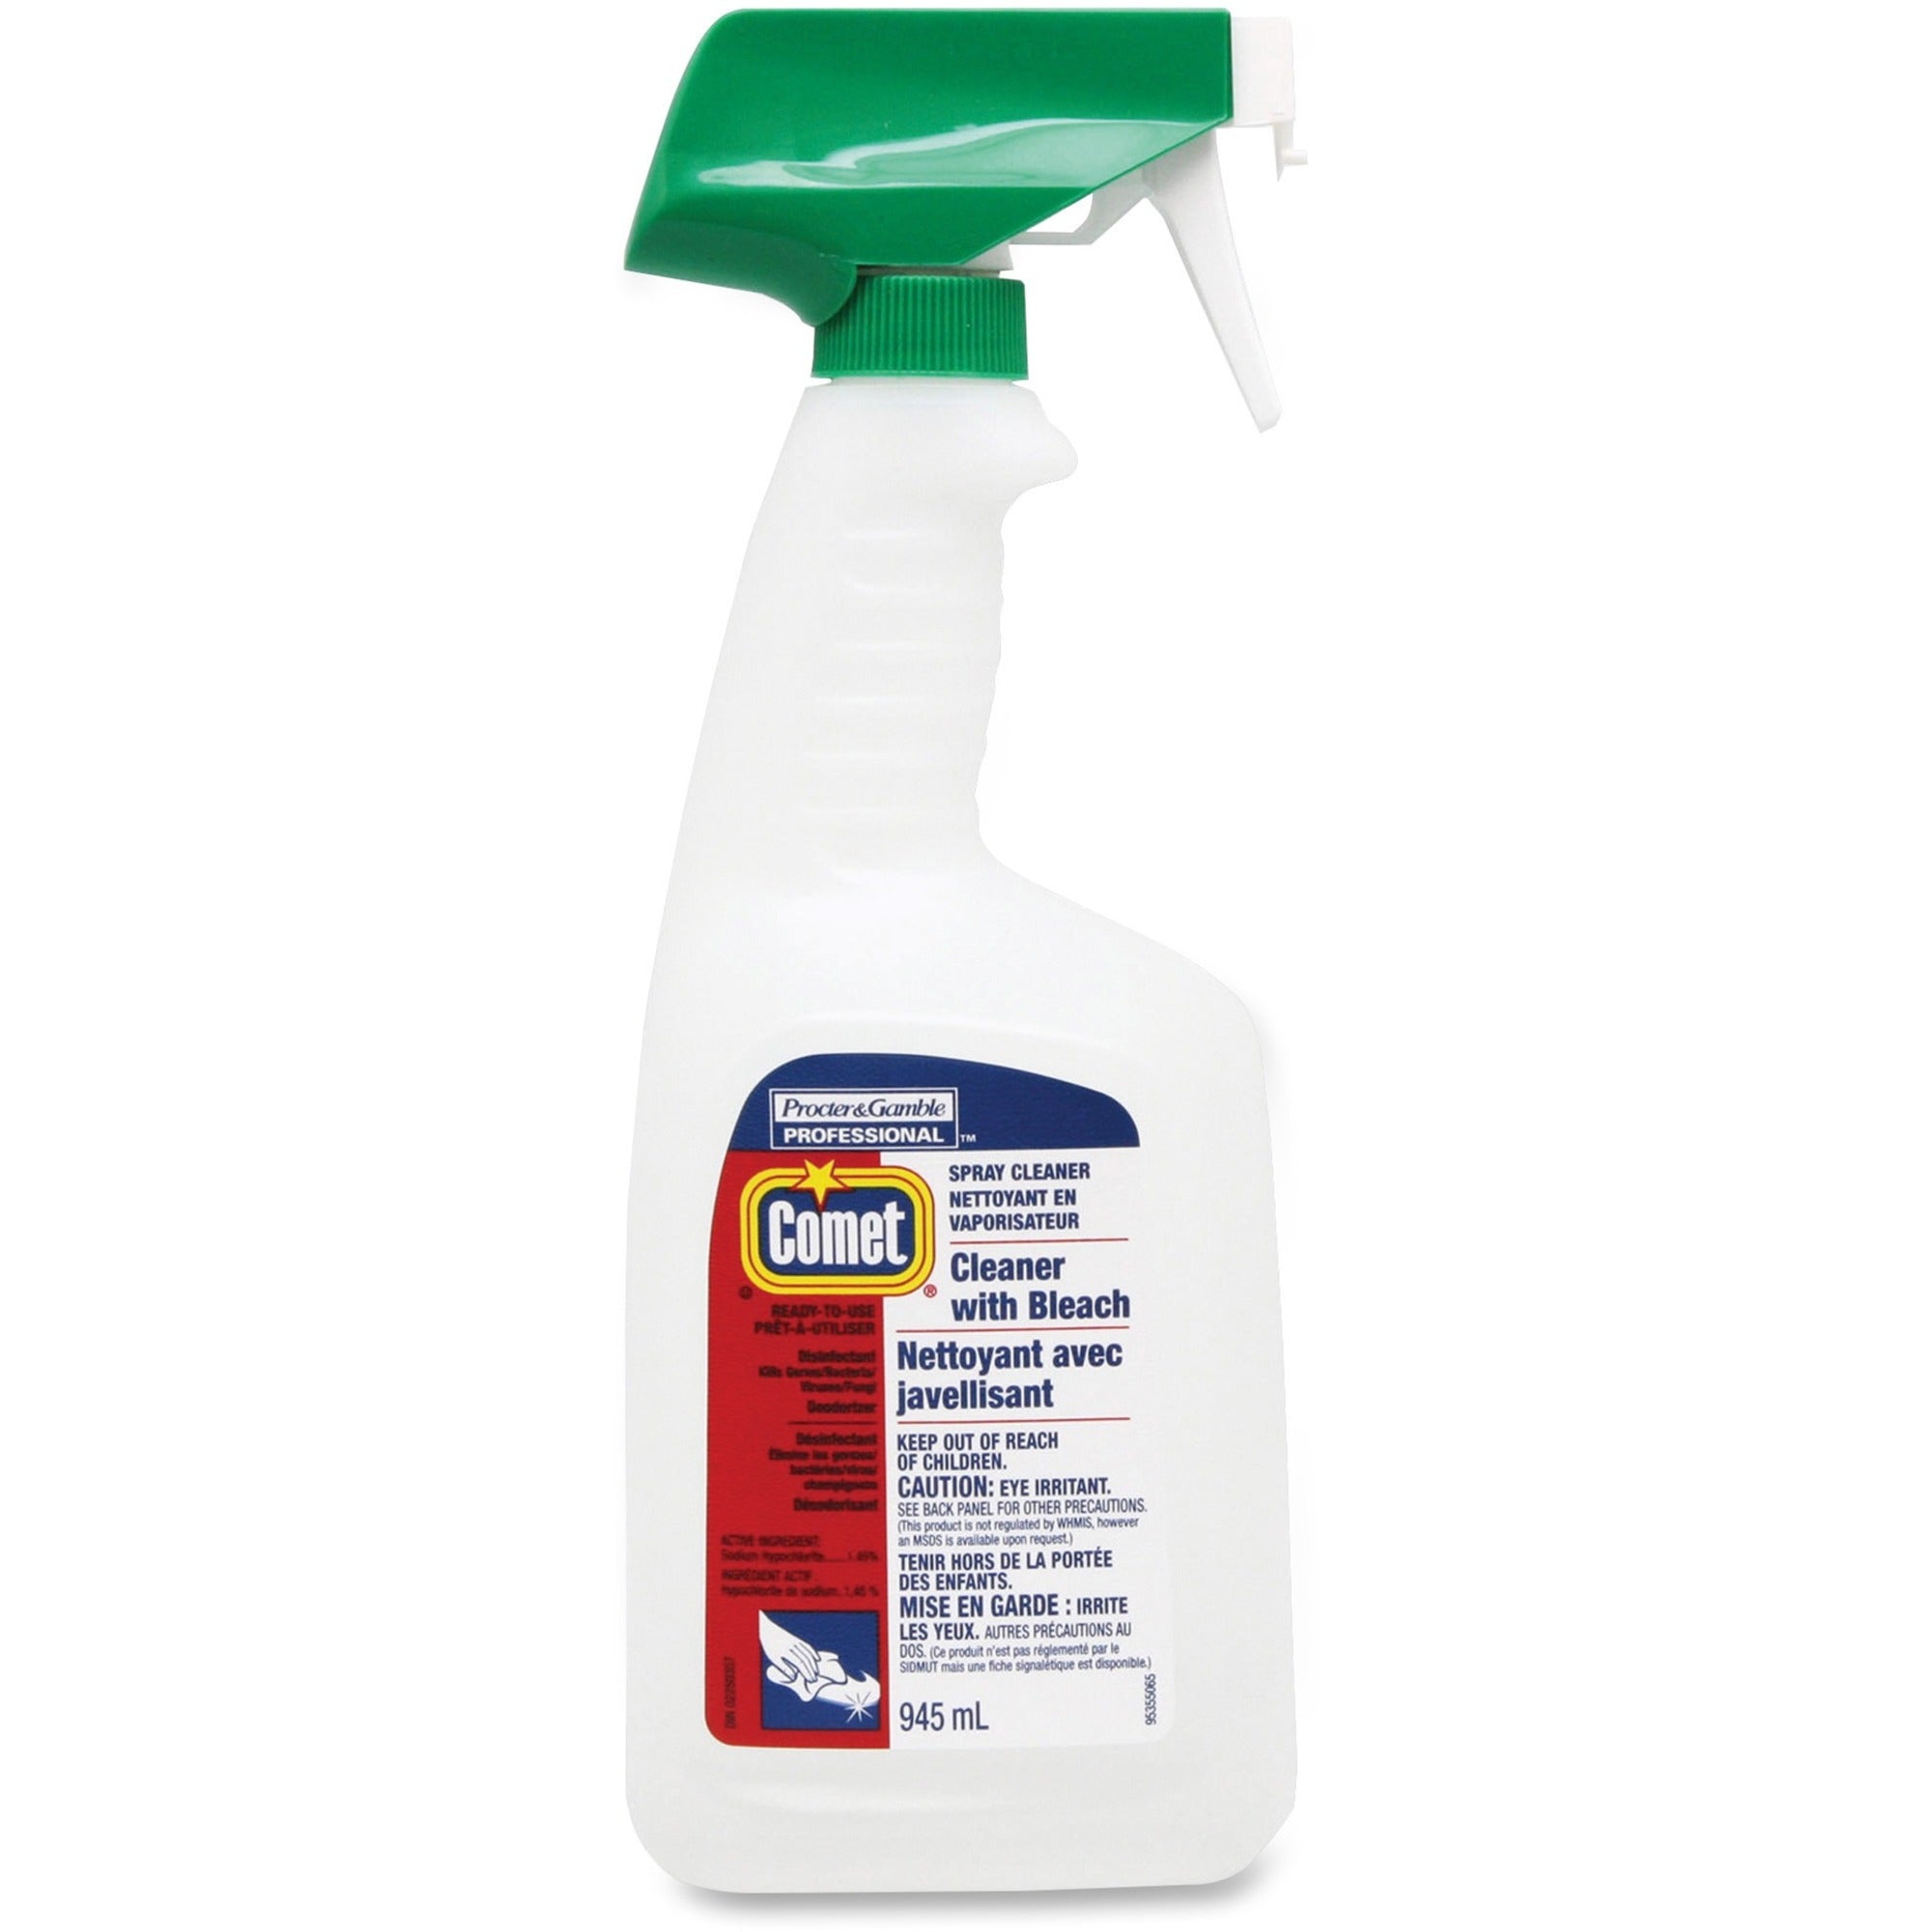 Comet Professional Disinfectant Cleaner with Bleach | 945 ml - Case of 8 Janitorial Supplies - Cleanflow